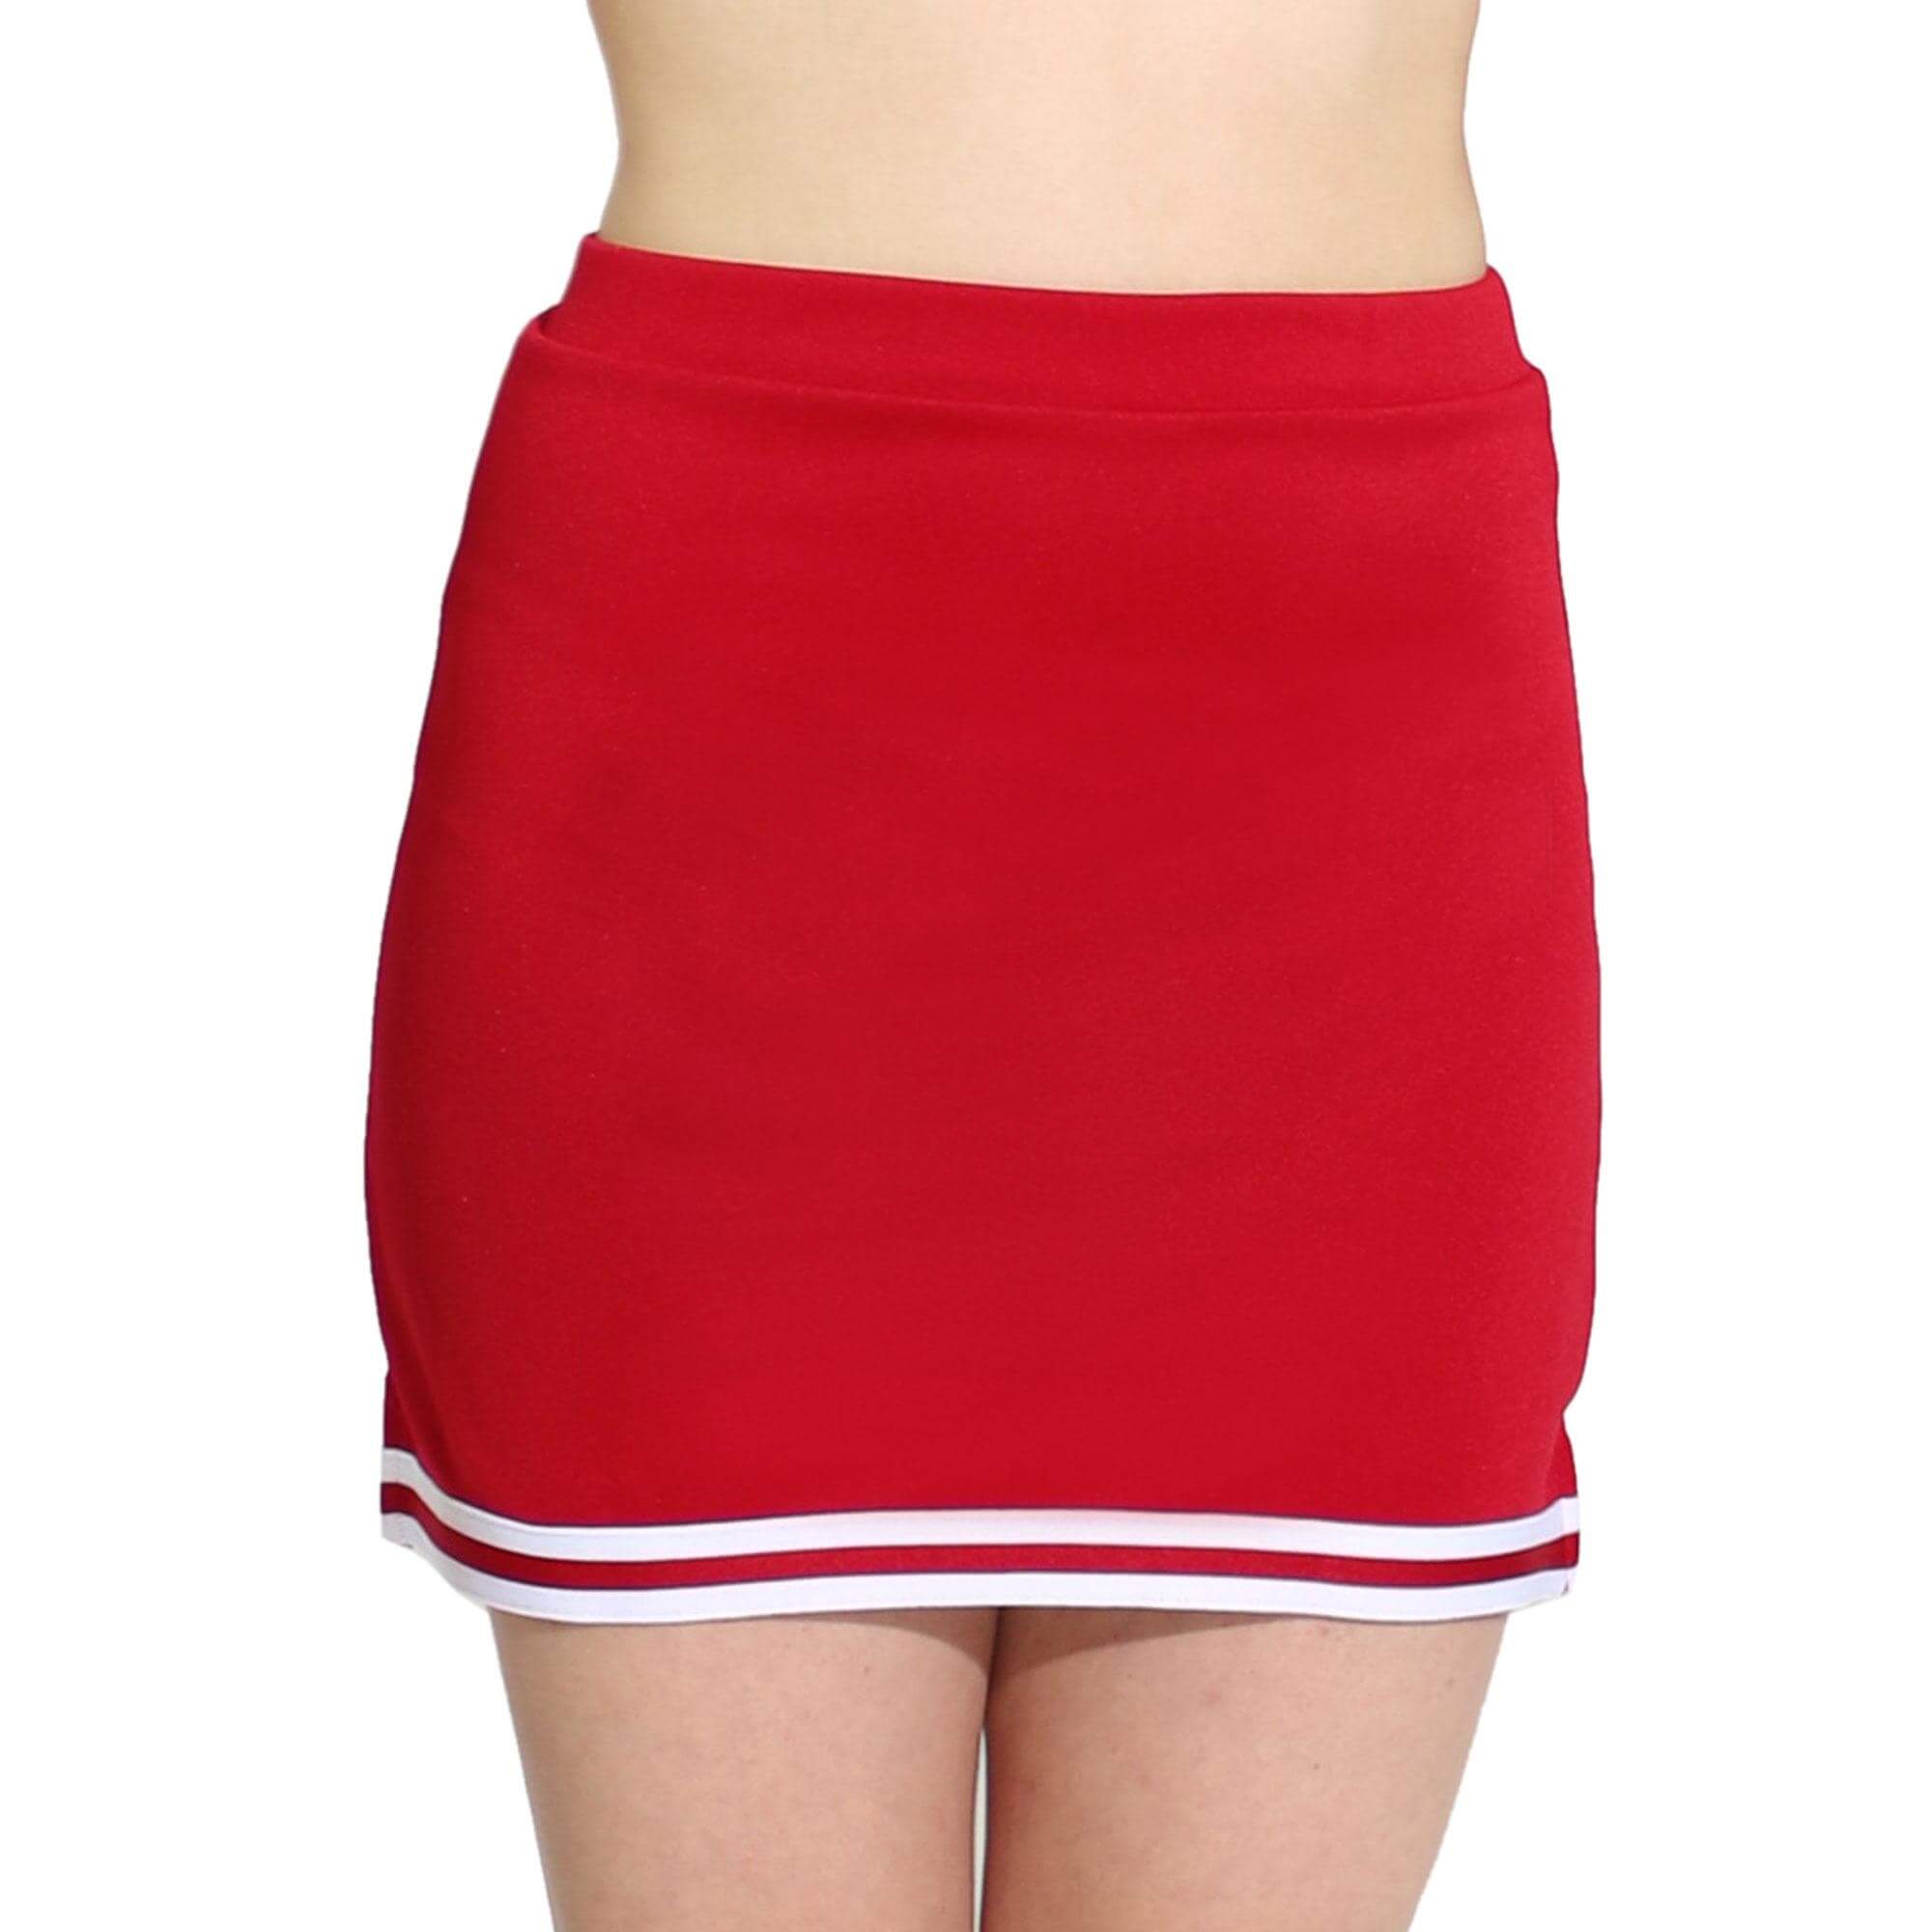 Danzcue Adult A-Line Cheerleaders Uniform Skirt - Click Image to Close